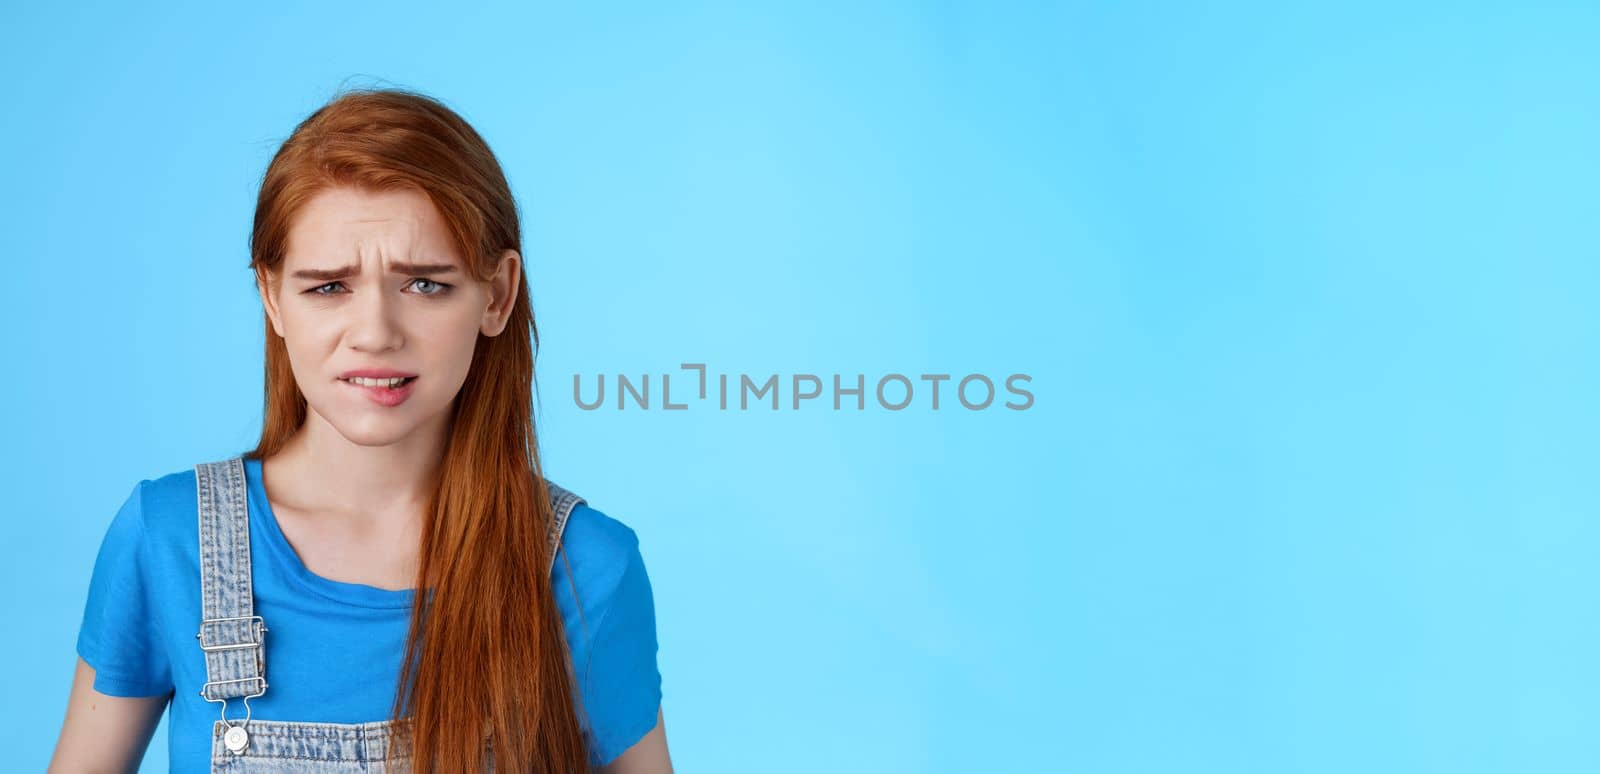 Uneasy upset redhead girl feel uncomfortable, stare frustrated, biting lip frowning, pull sad face upset, apologizing friend, express pity dilsike, stare doubtful uncertain, make bad choice.